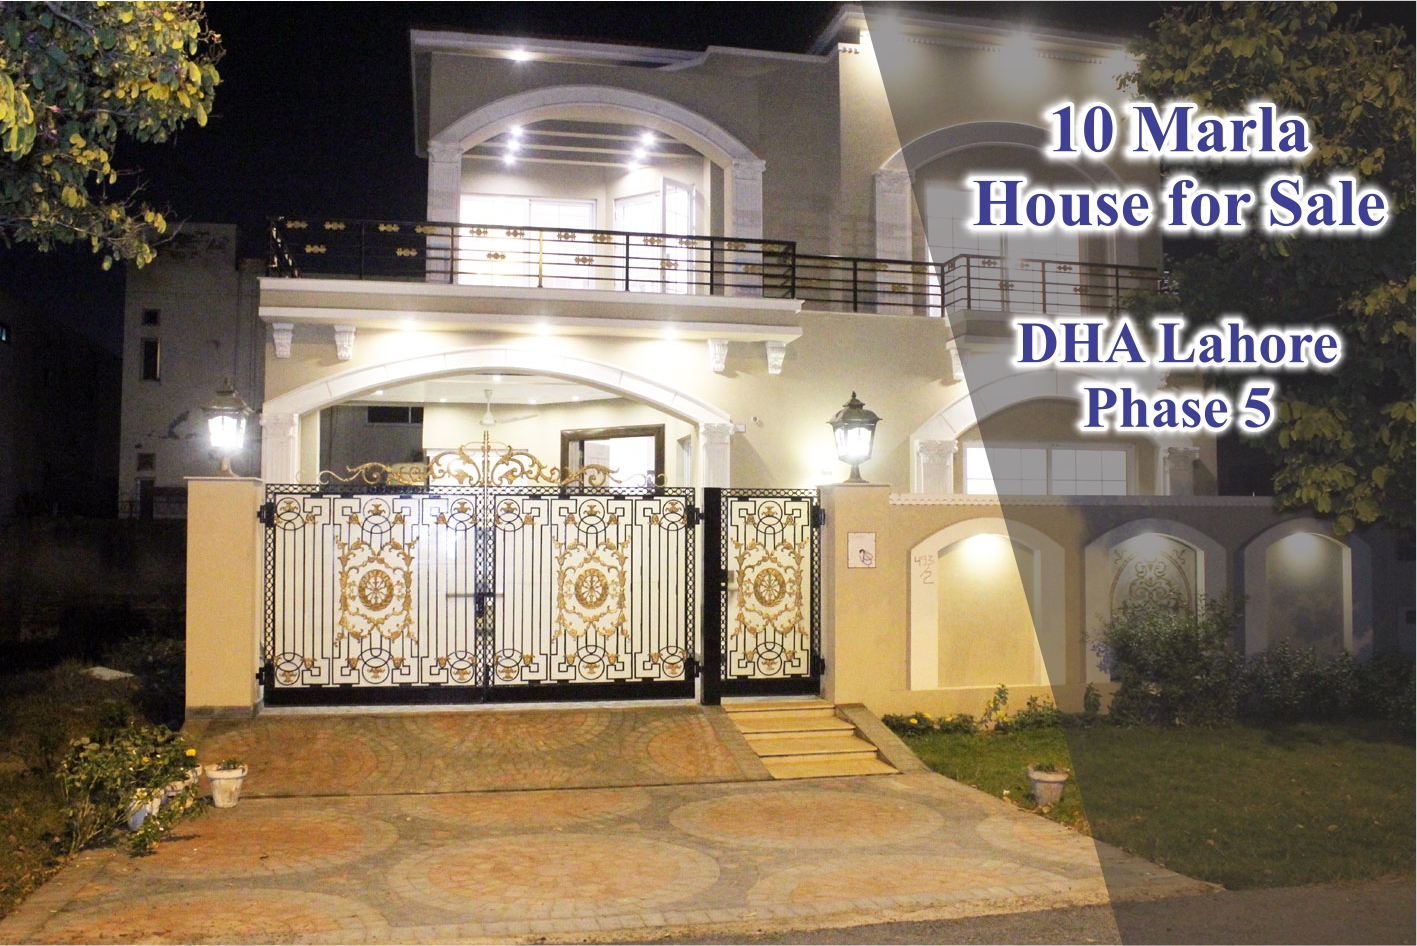 10 Marla Beautiful House For Sale. In DHA Lahore Phase 5